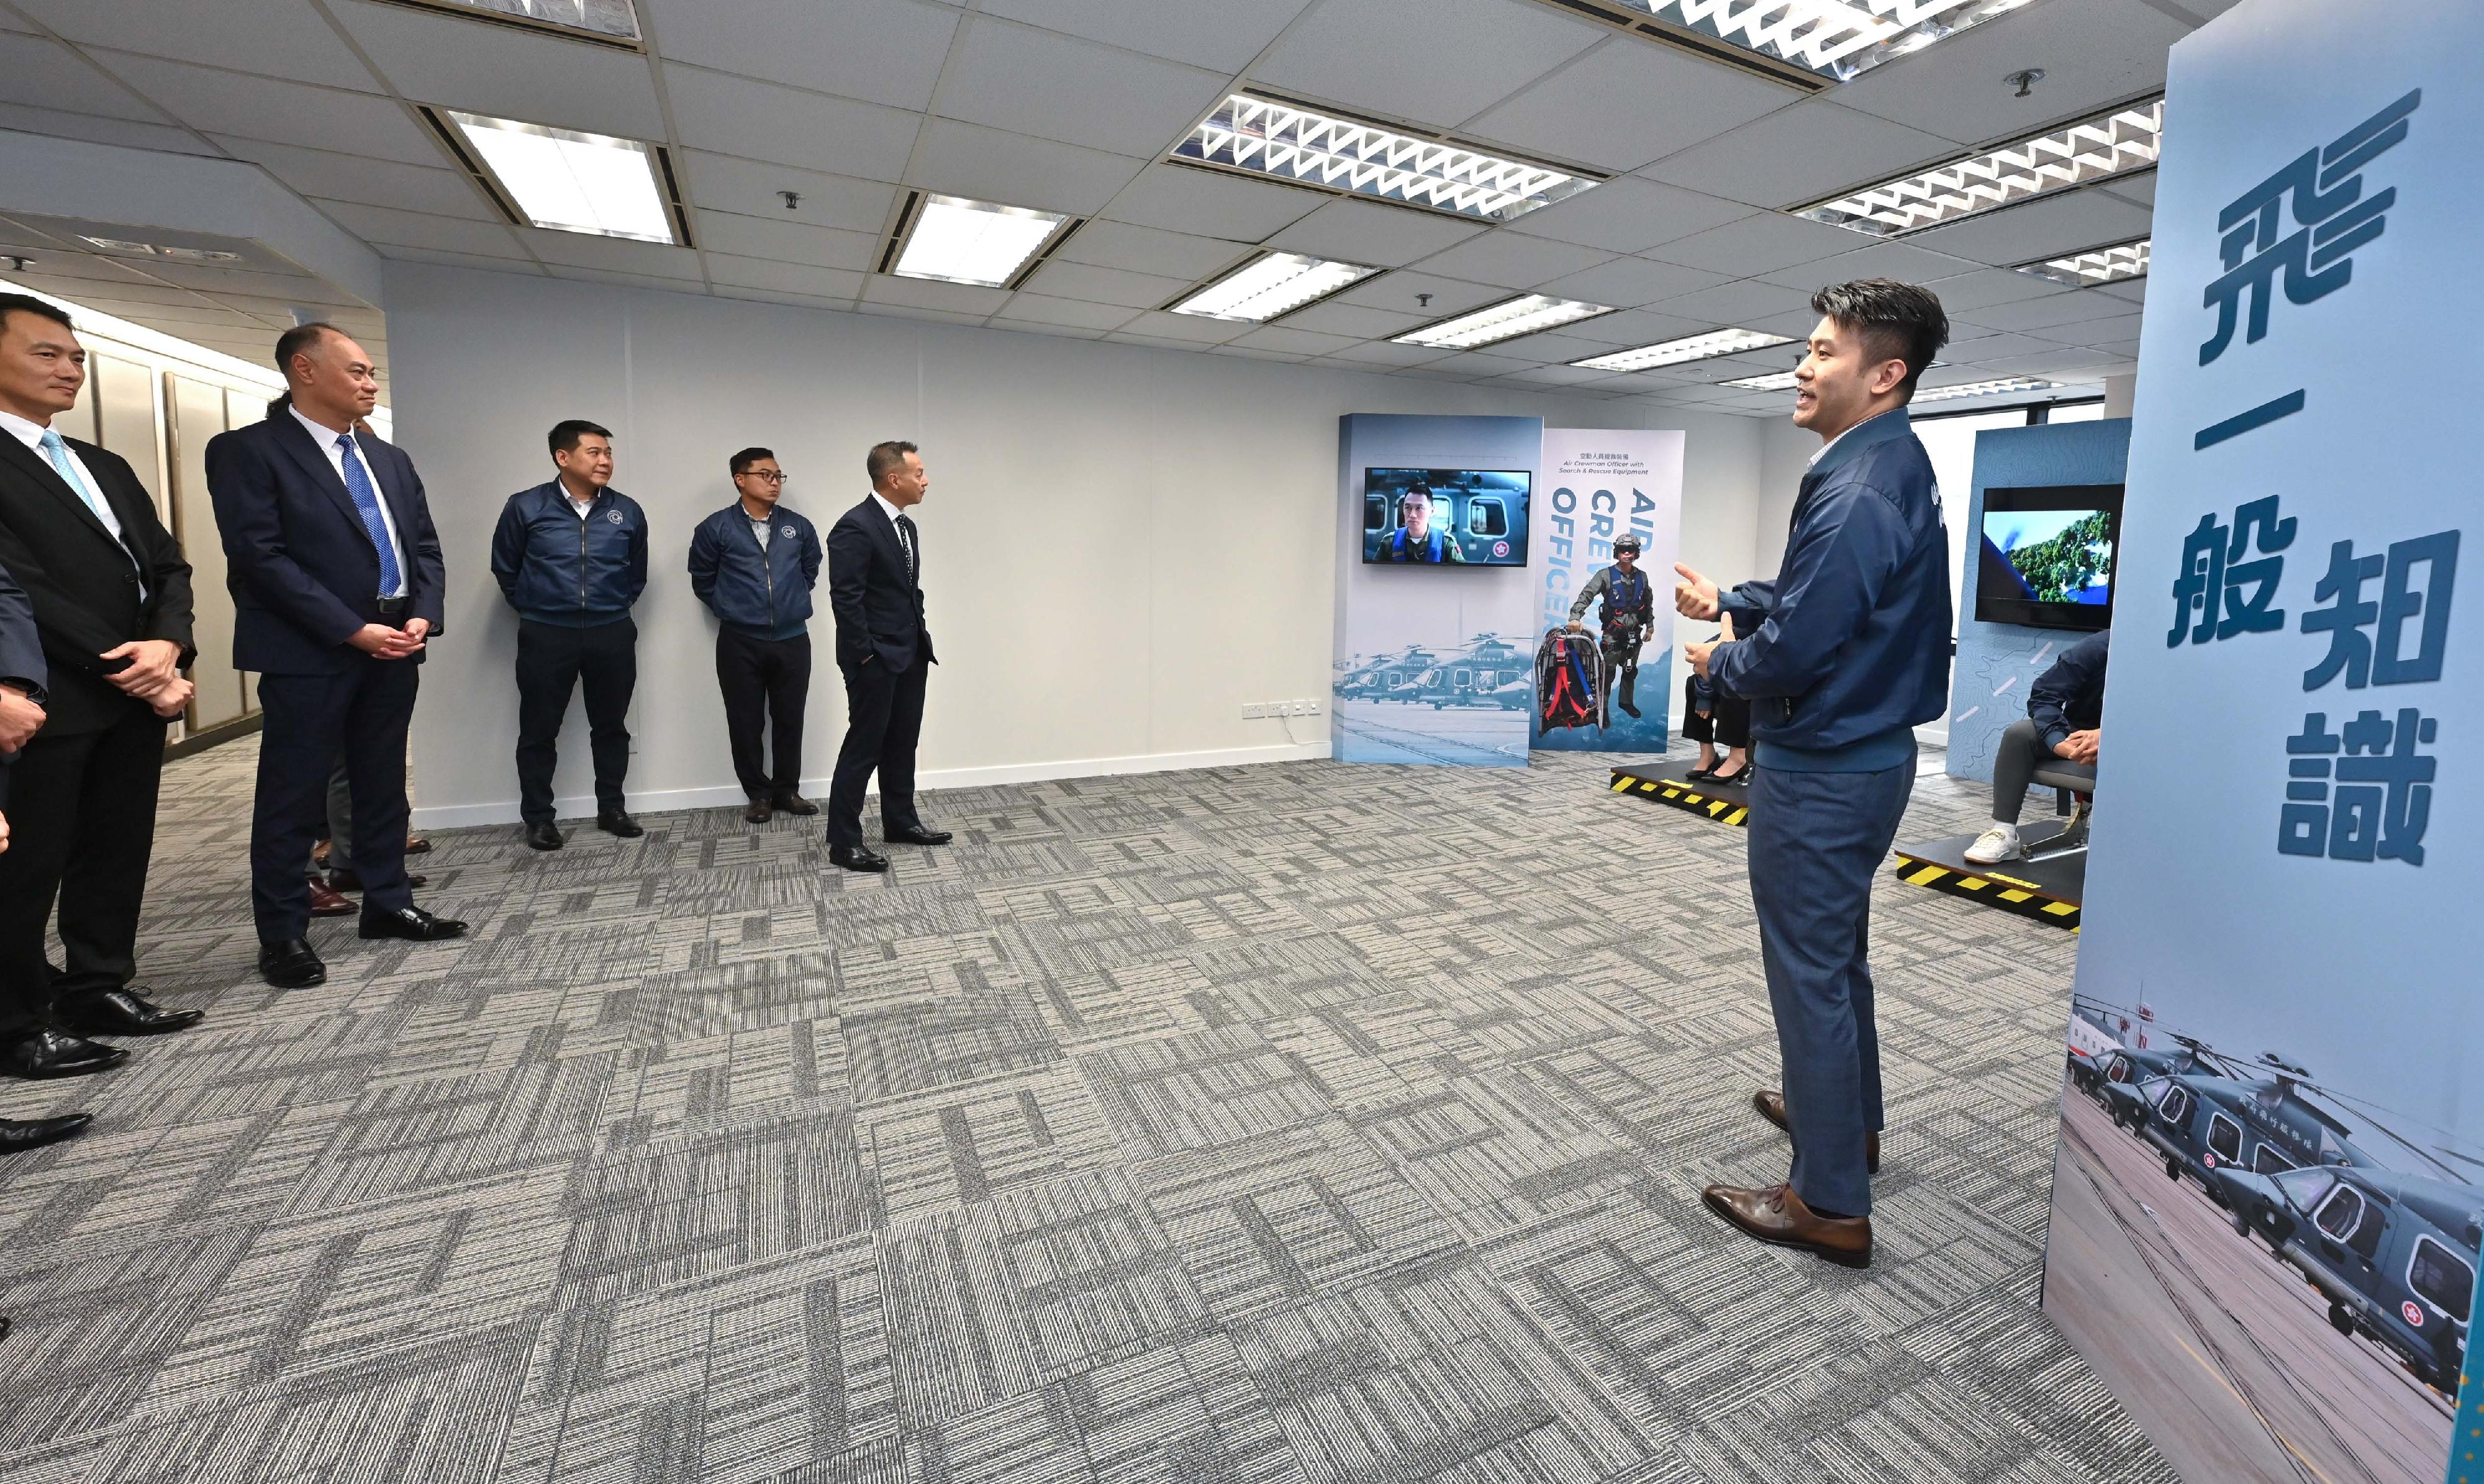 The “Safe Community Hub” (The Hub) run by the Inter-departmental Counter Terrorism Unit (ICTU) was officially opened today (October 27). Photo shows an officer introducing the flight simulation.